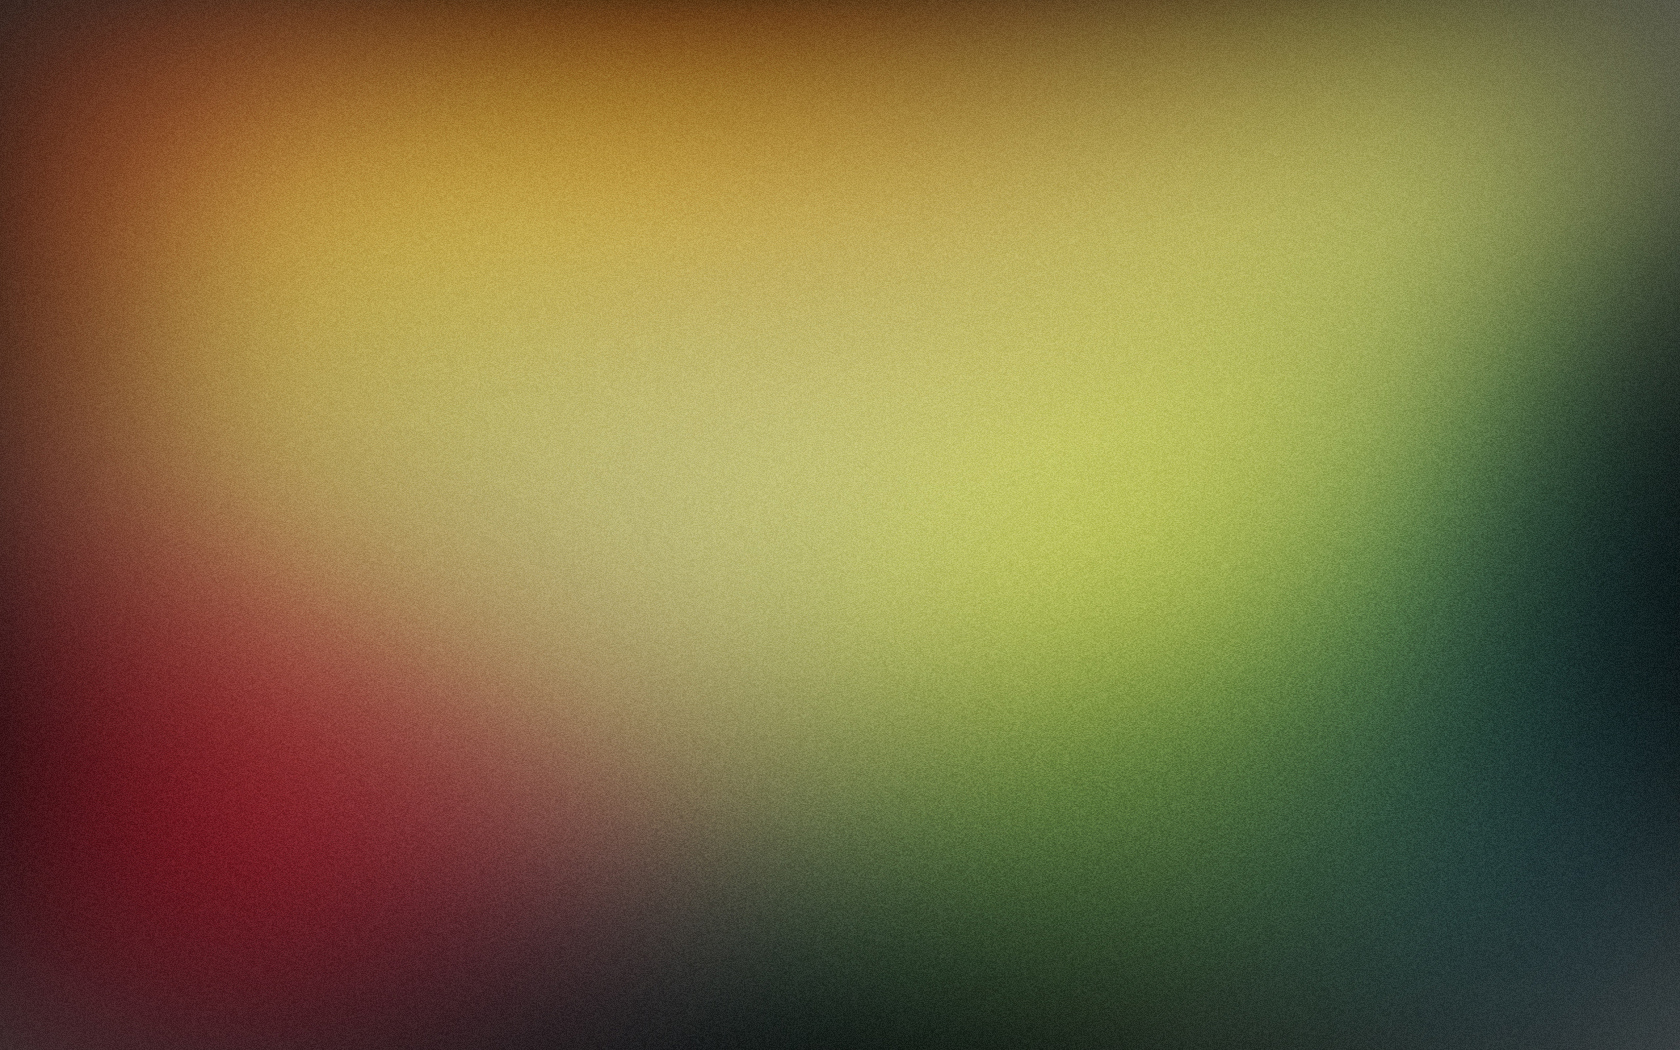 textures gaussian blur simple background simple colors